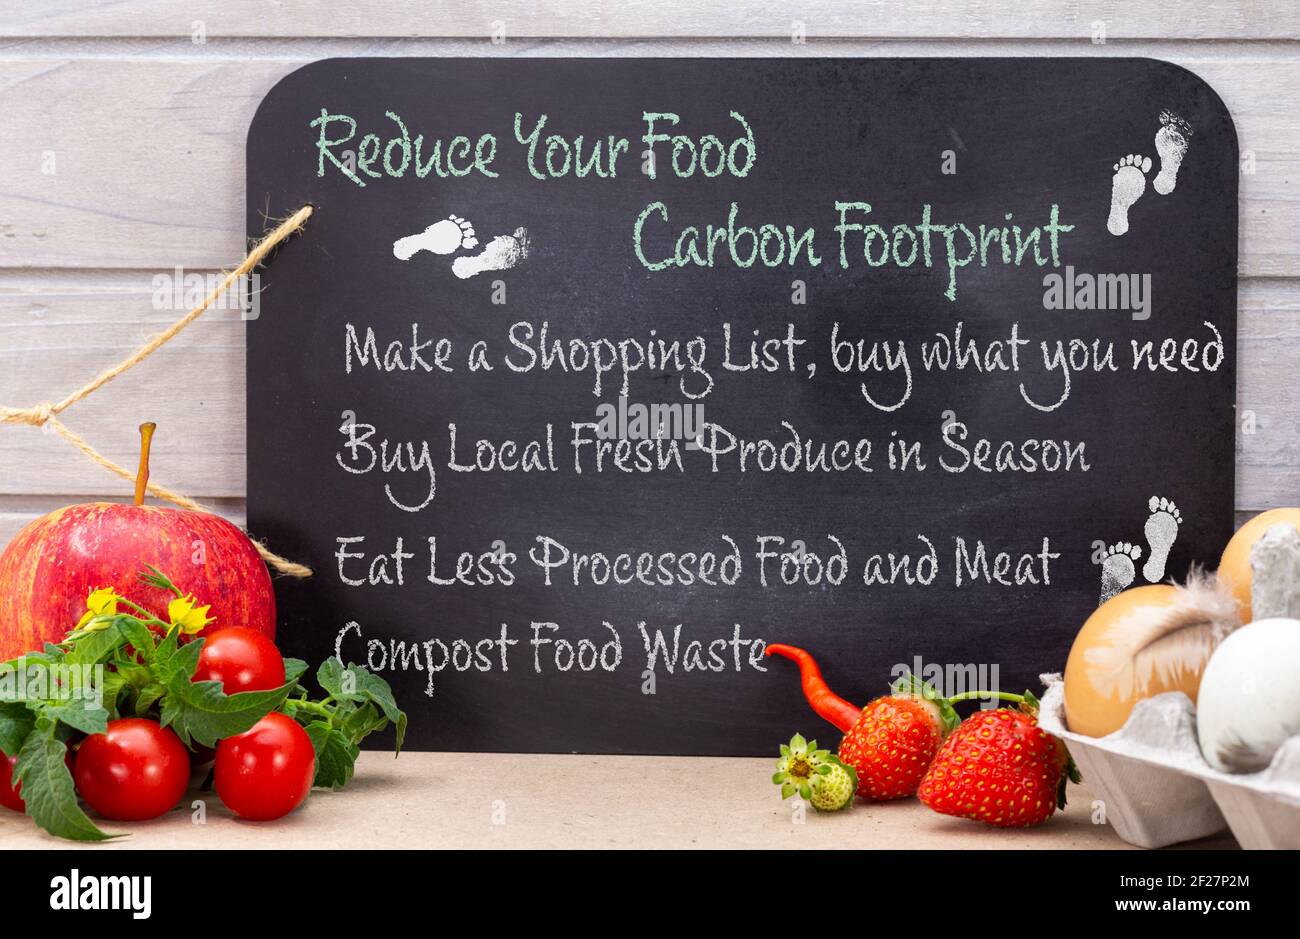 https://c8.alamy.com/comp/2F27P2M/chalkboard-with-reducing-your-food-carbon-footprint-heading-and-list-of-ways-to-reduce-carbon-pollution-sustainable-living-and-ethical-consumerism-2F27P2M.jpg